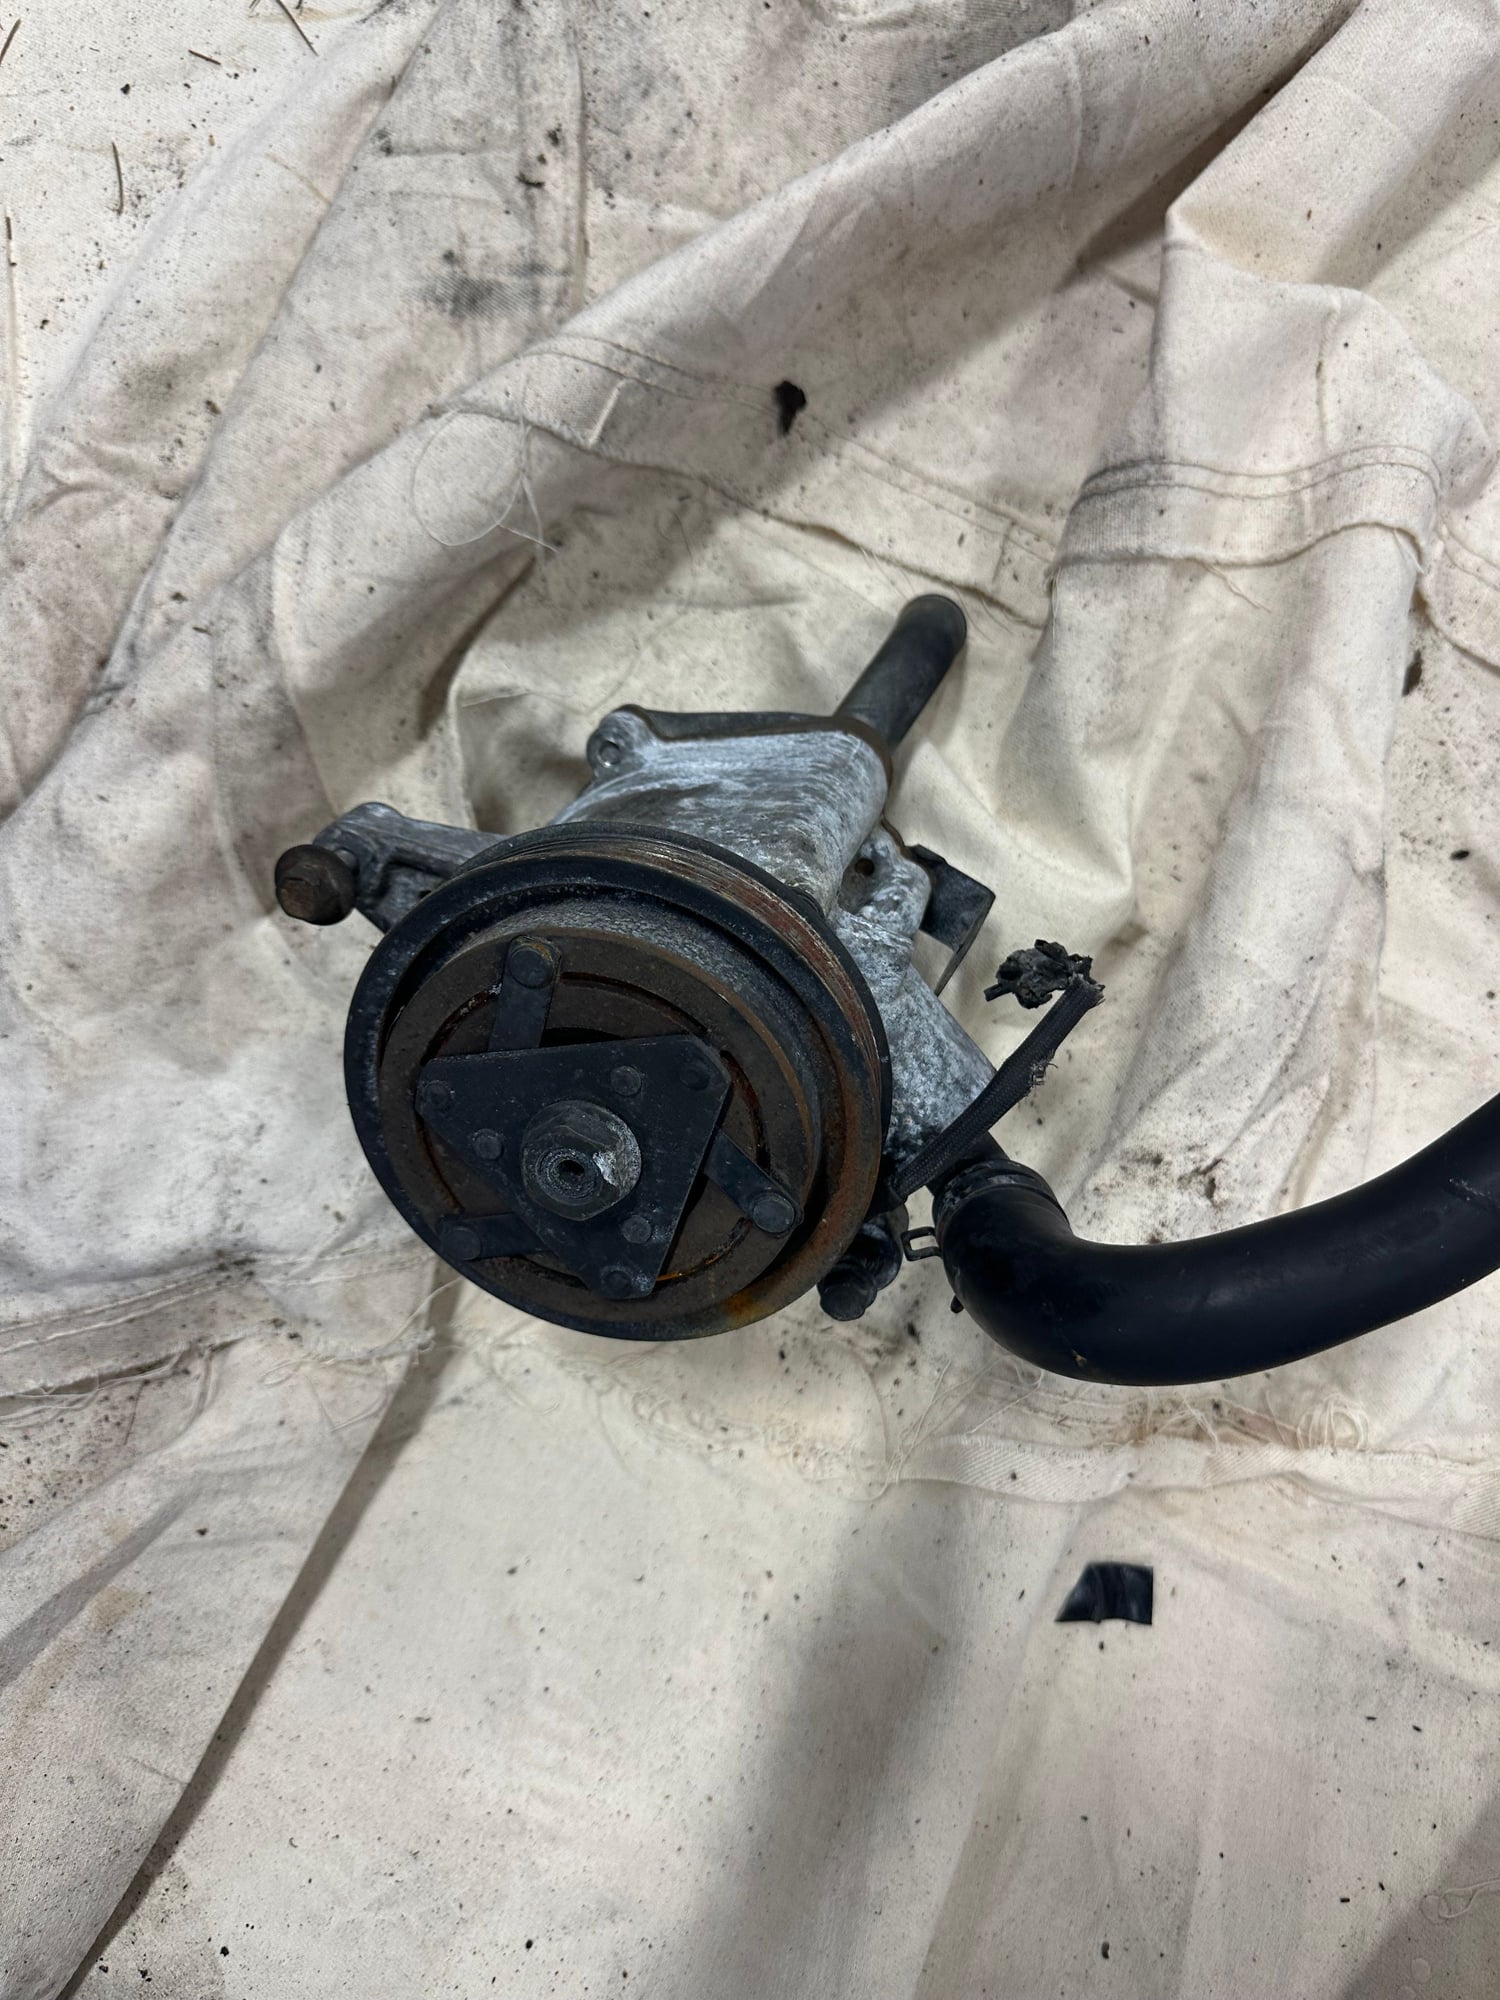 Engine - Intake/Fuel - Fd rx7 air pump - Used - 1993 to 1999 Mazda RX-7 - Upland, CA 91786, United States